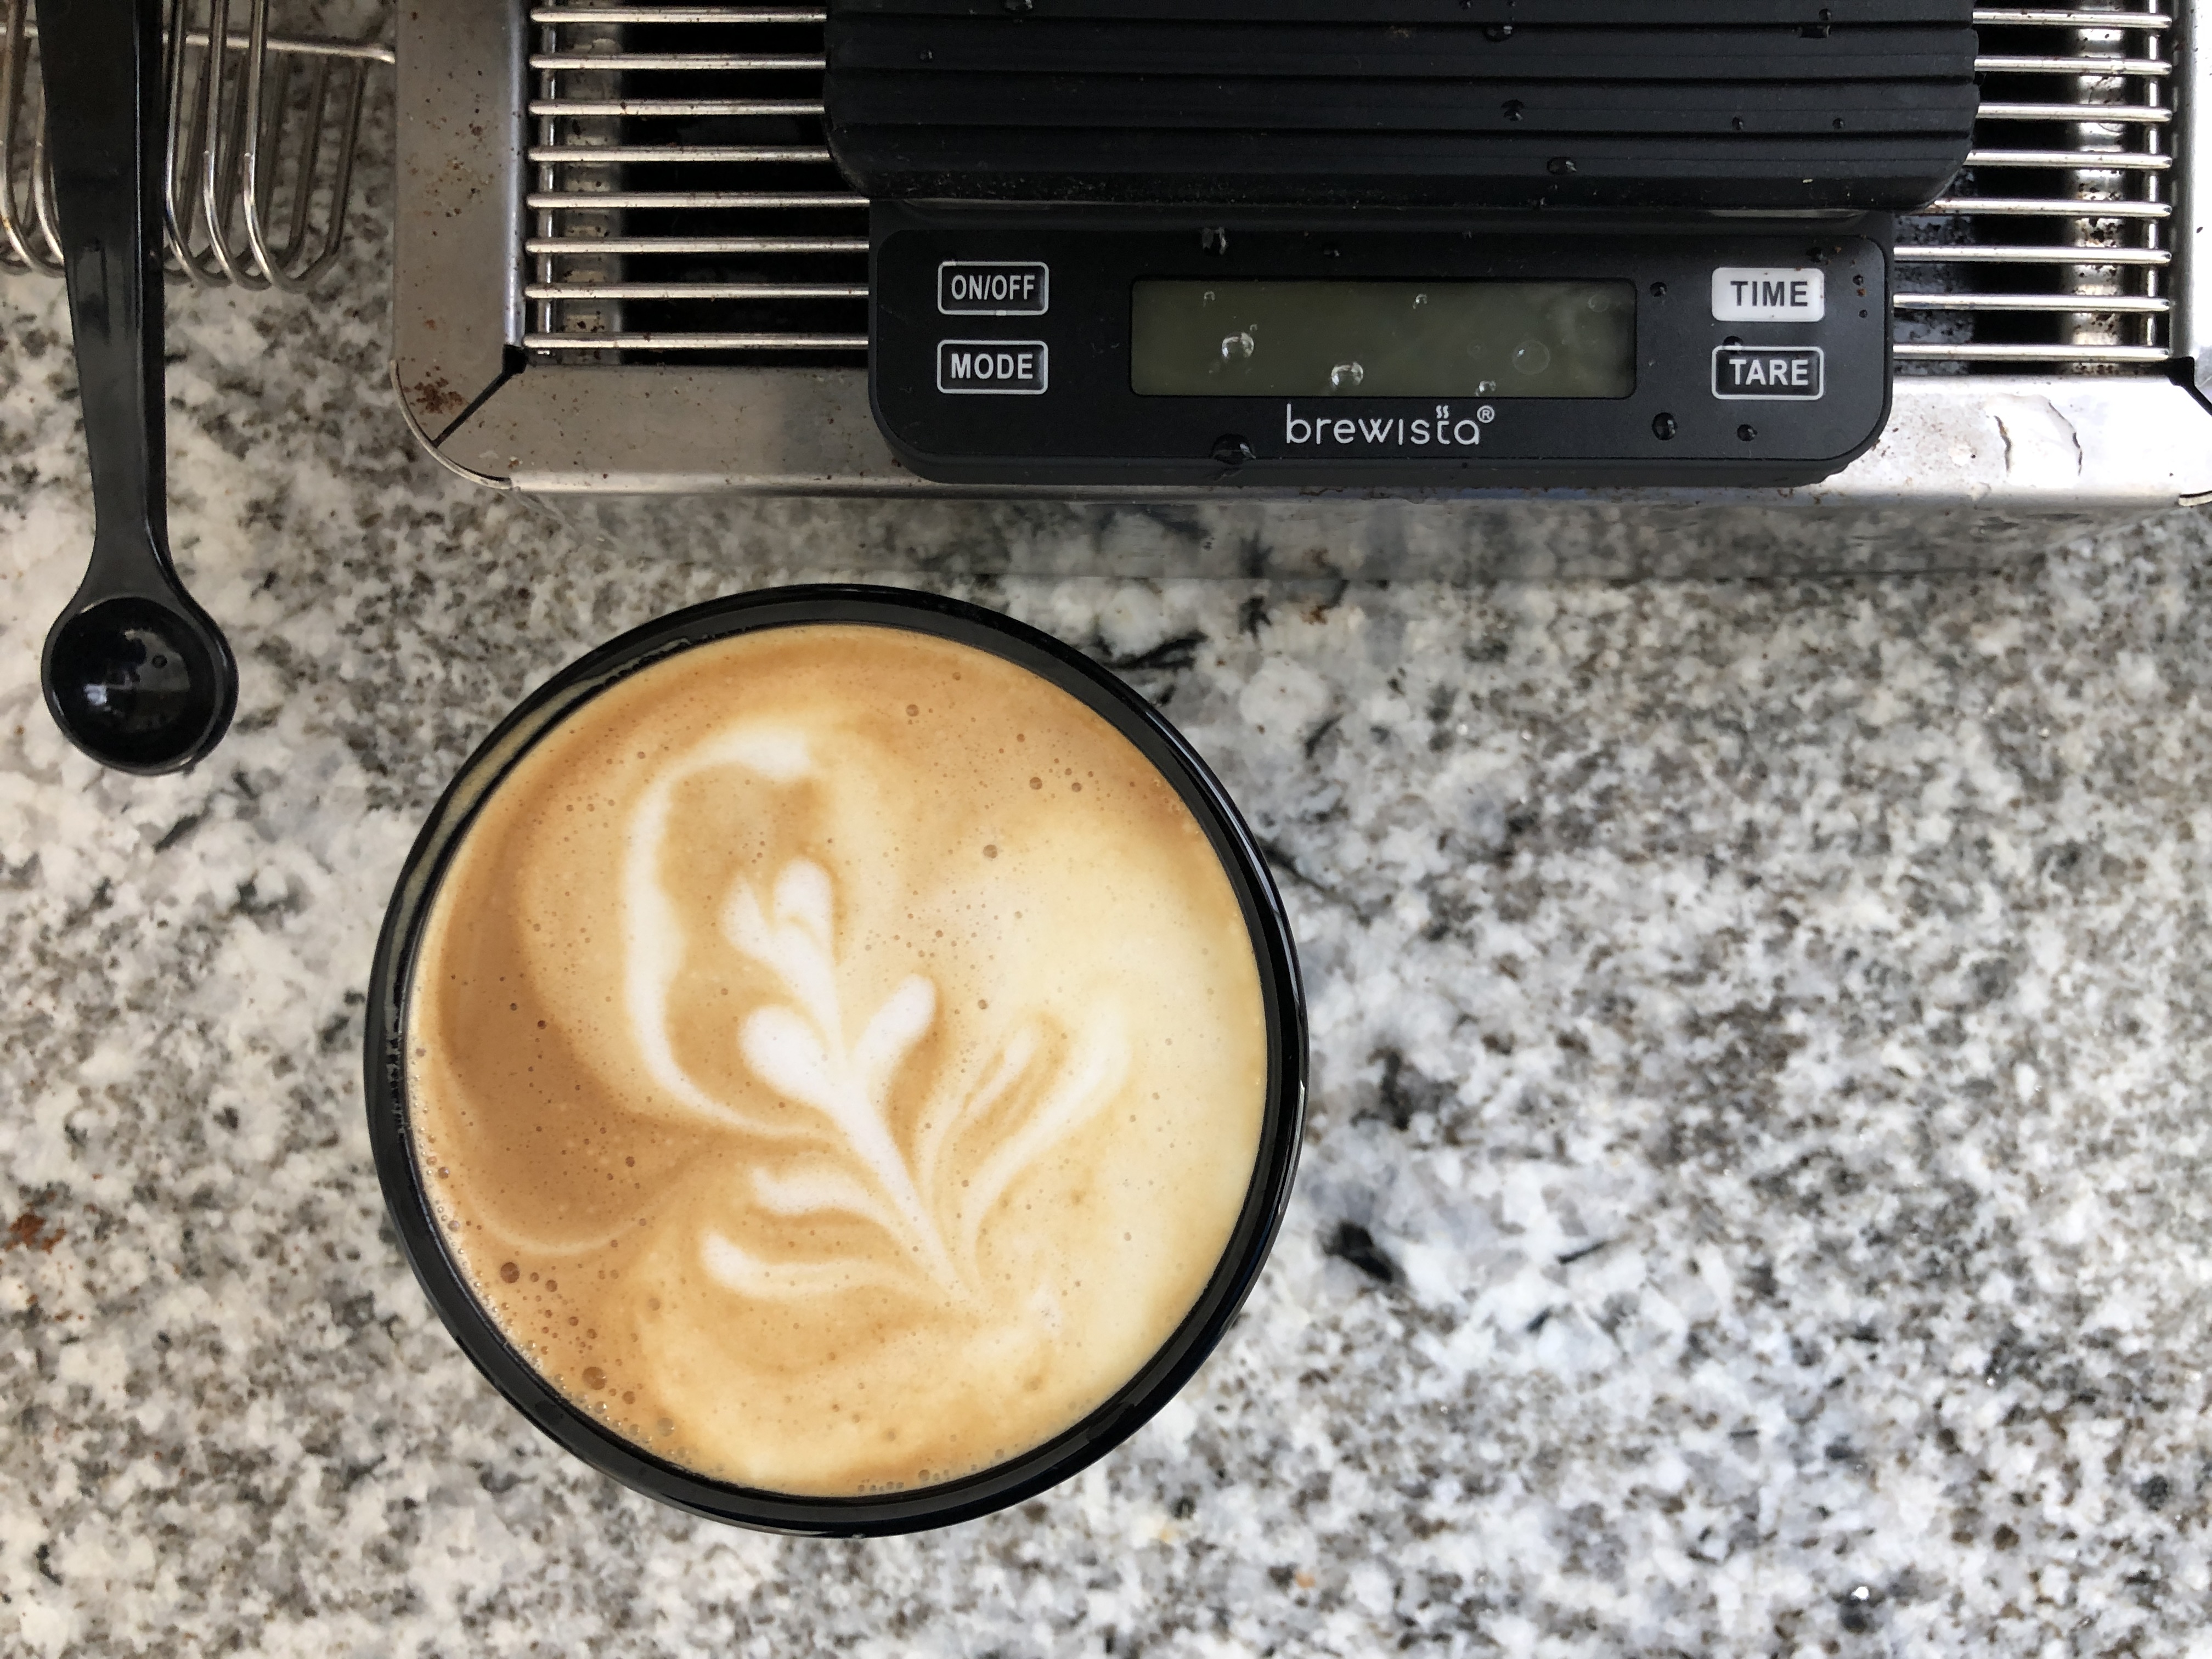 a cappuccino in a gray cup on a black and white speckled countertop, beside a small digital scale